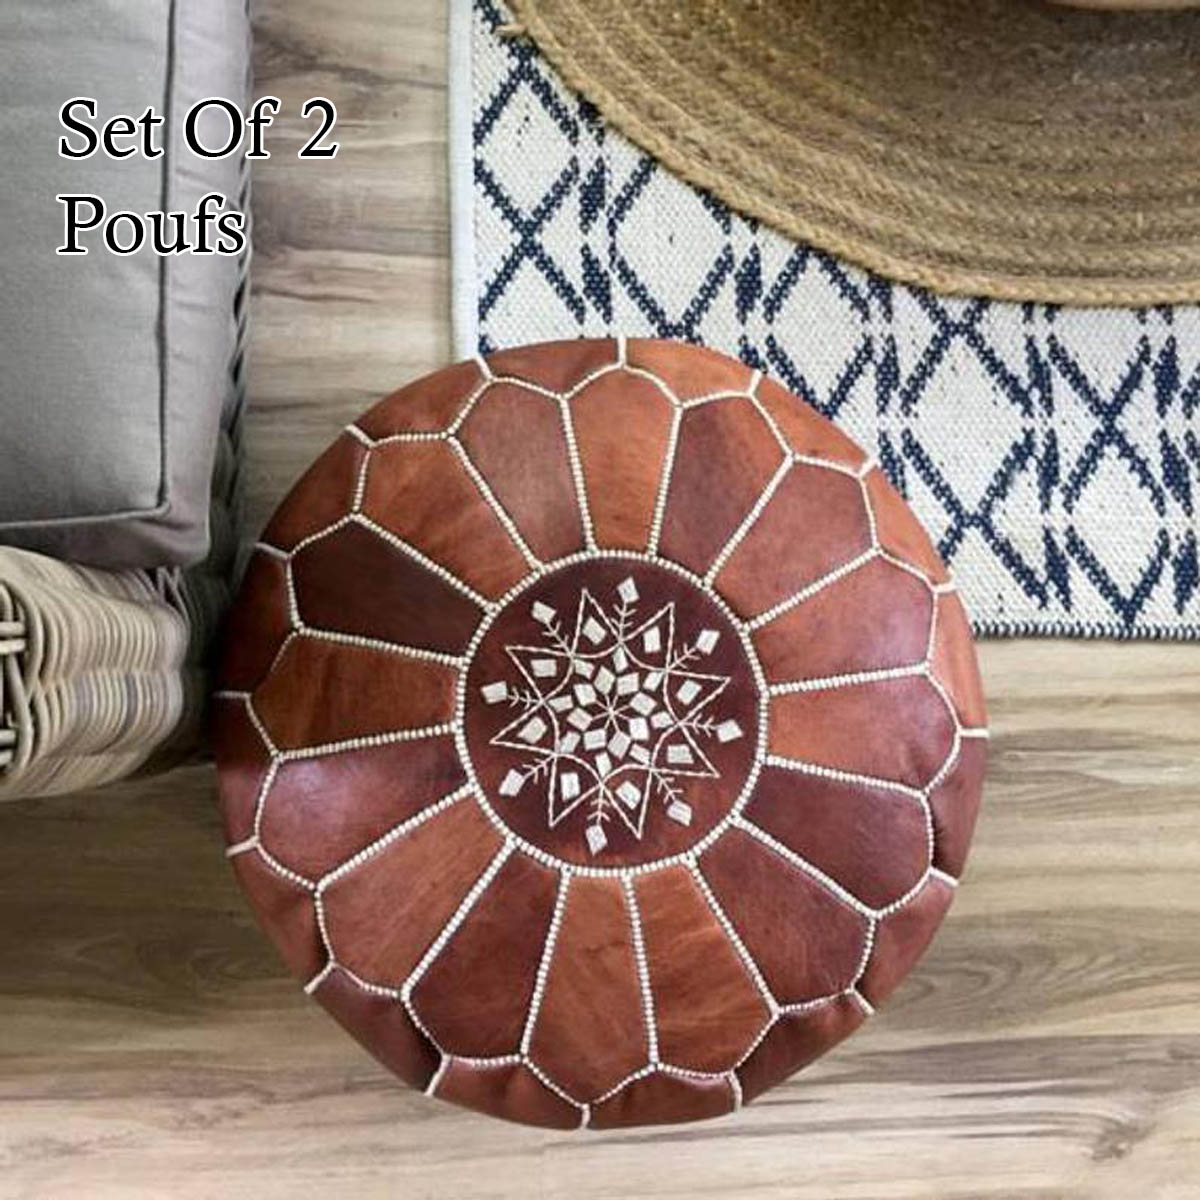 Free Shipping Lot of 2 MOROCCAN POUF MOROCCAN LEATHER POUF OTTOMAN FOOTSTOOL 